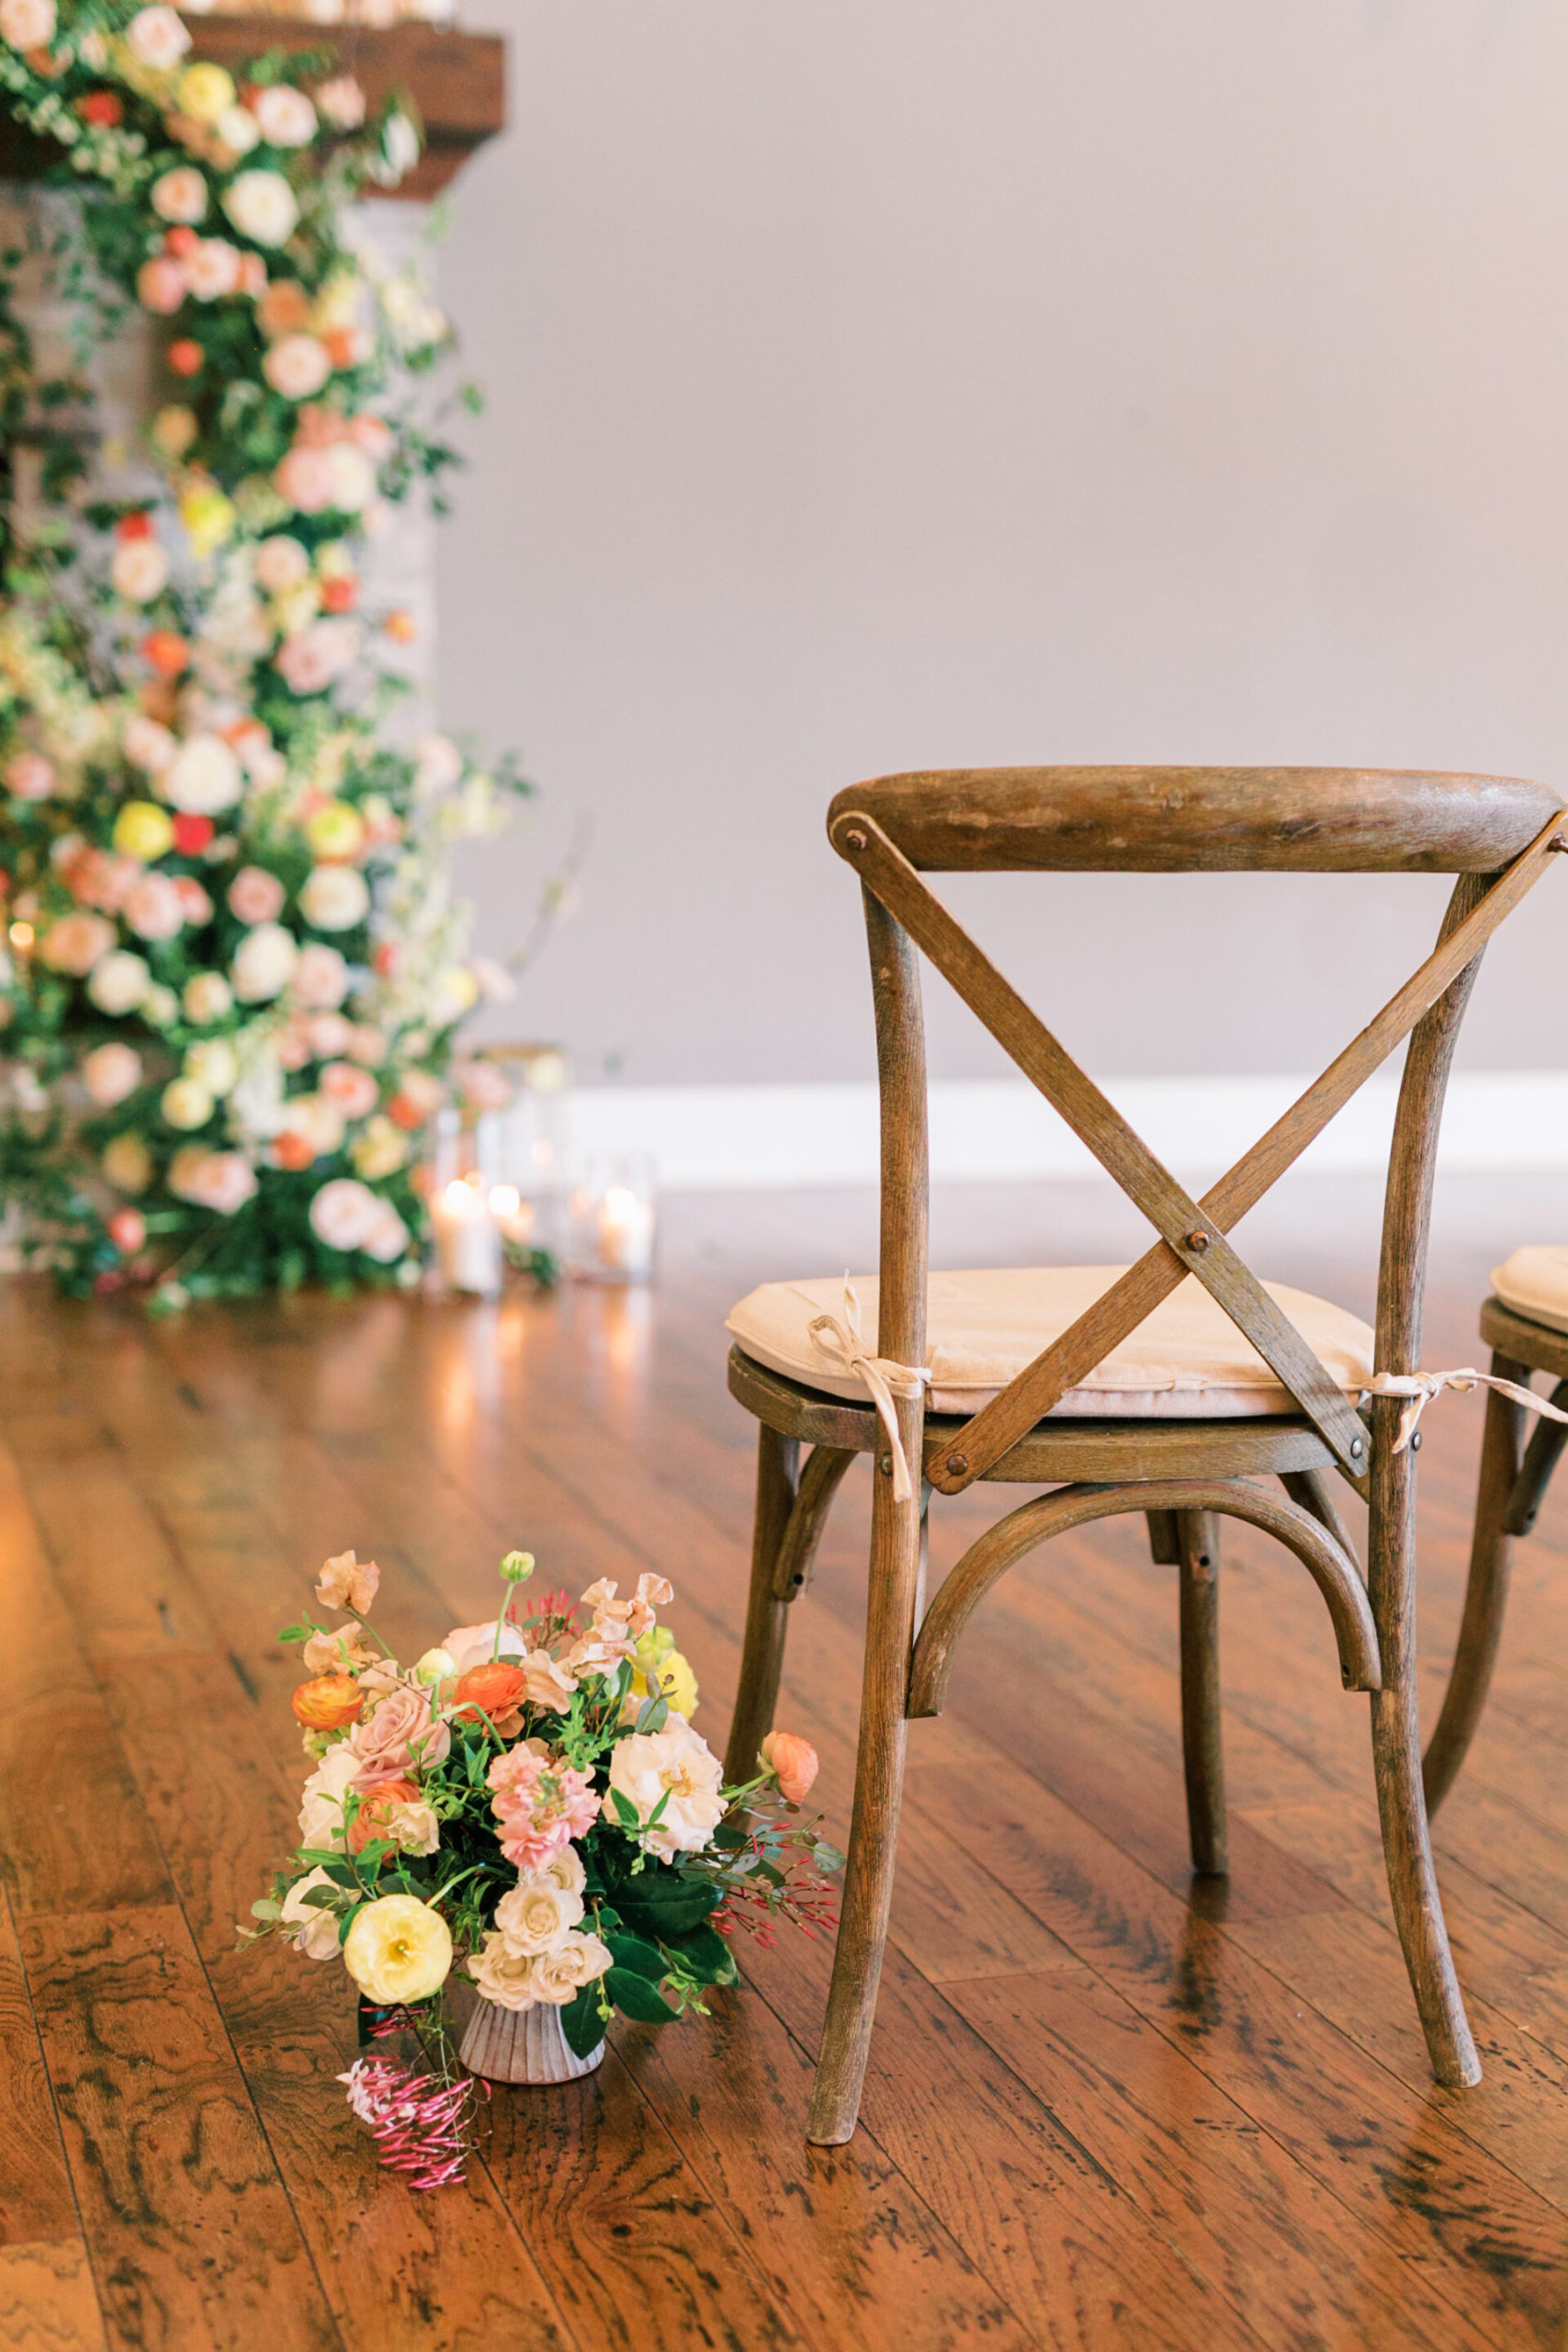 Ceremony space and floral details for expensive Charleston wedding